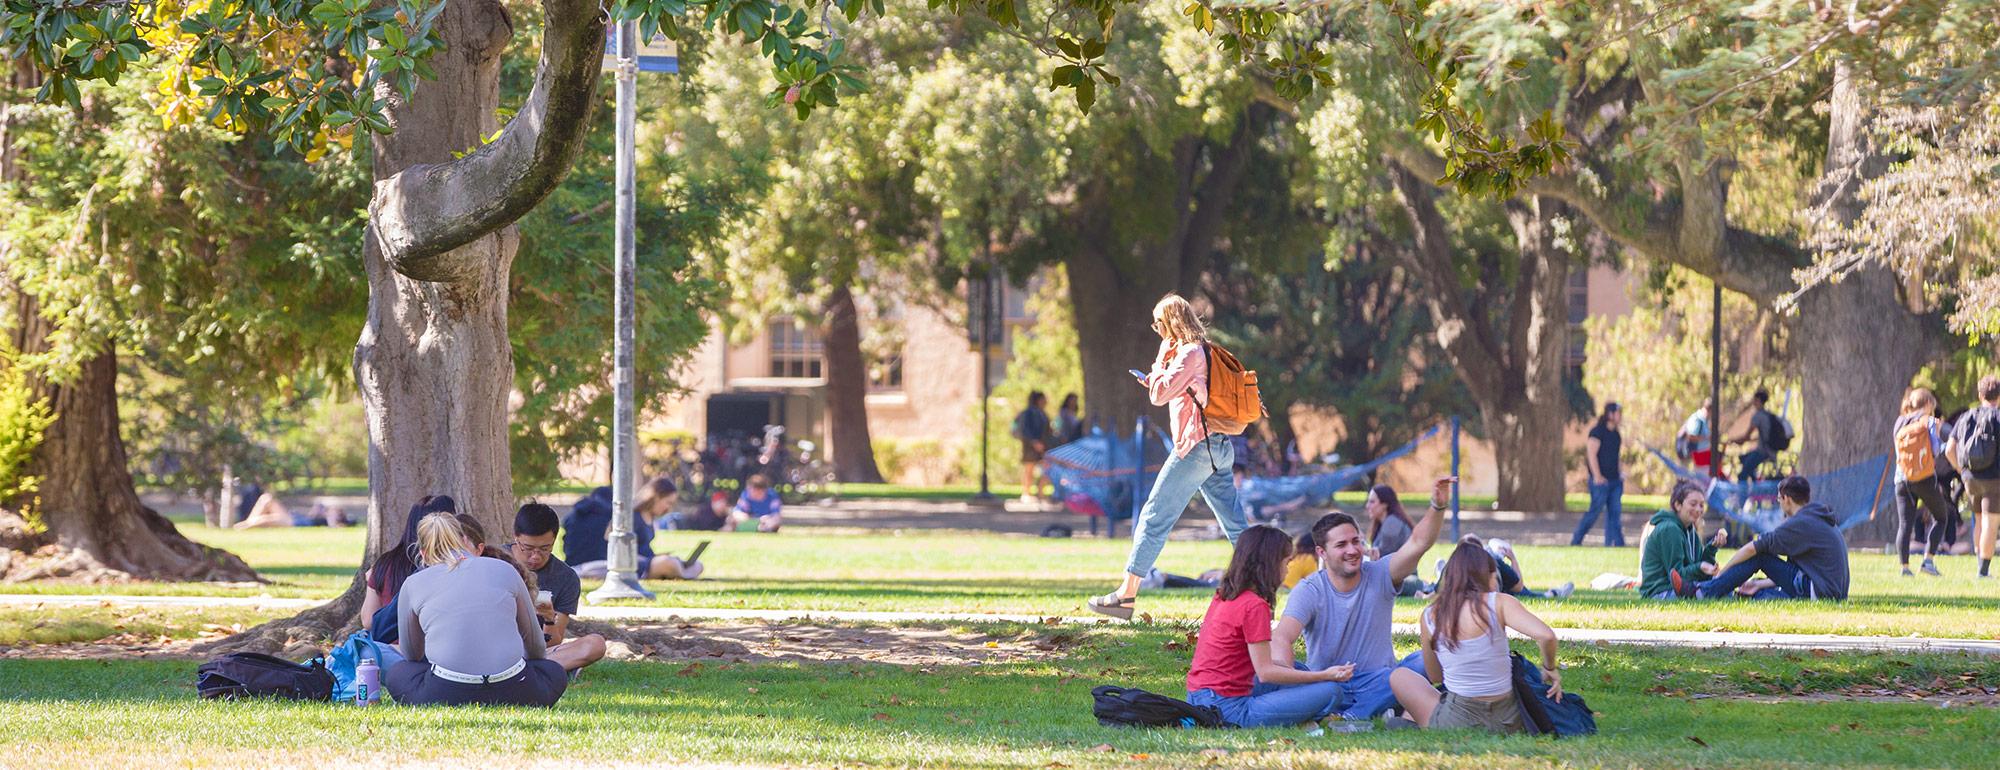 students sitting on the grass outside enjoying the quad